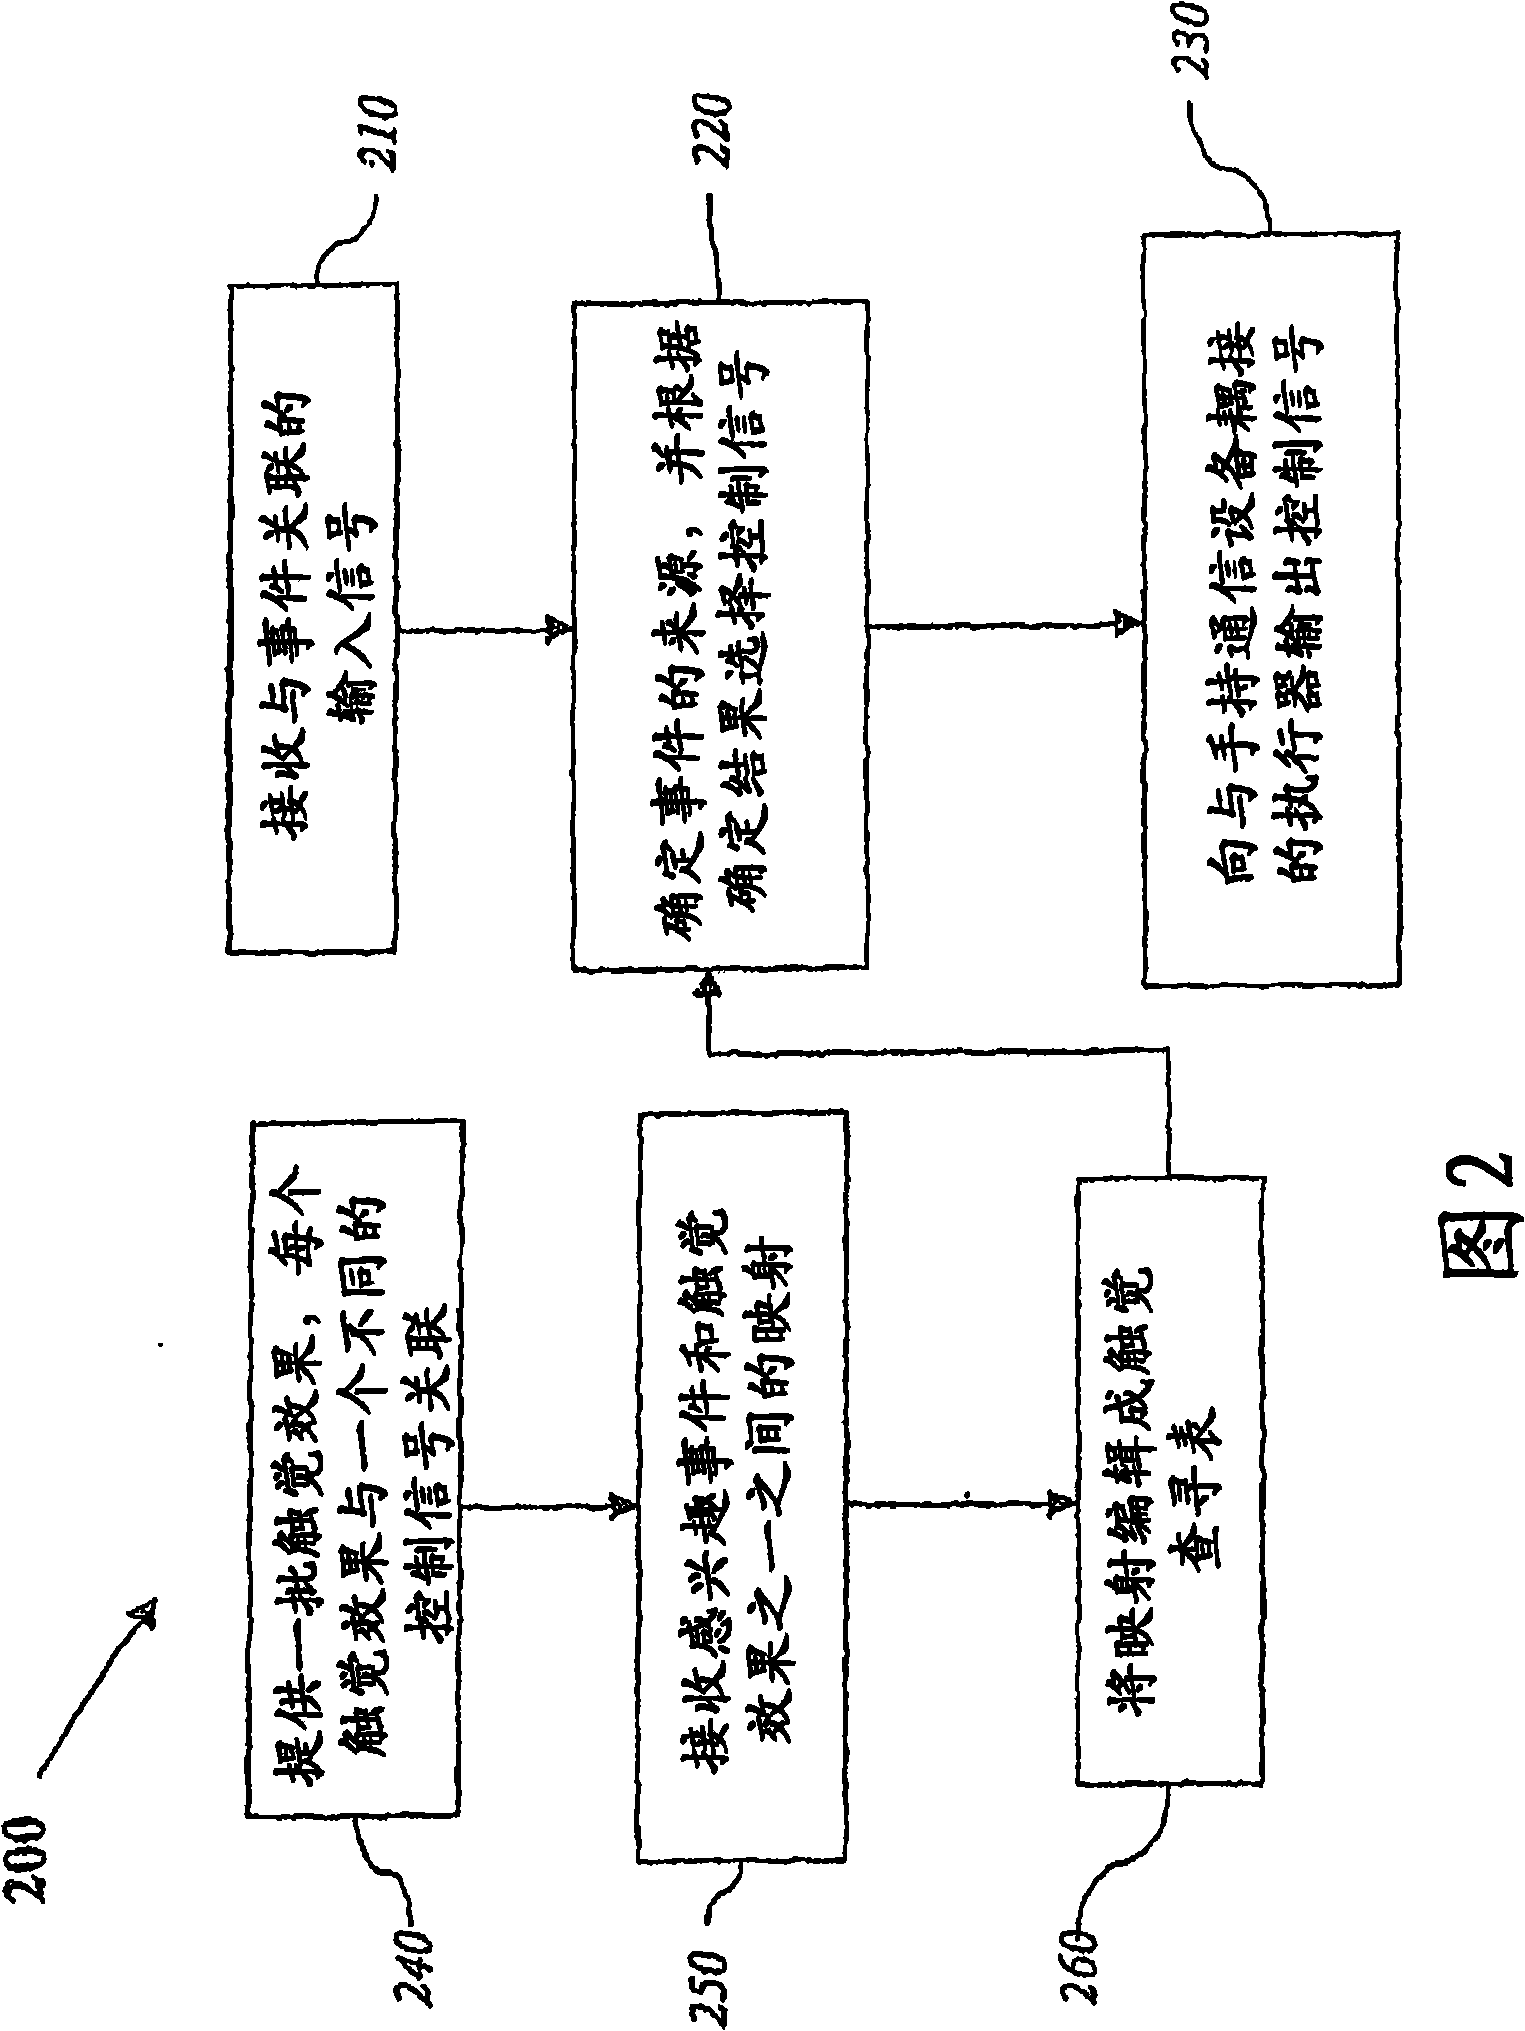 Methods and systems for providing haptic messaging to handheld communication devices